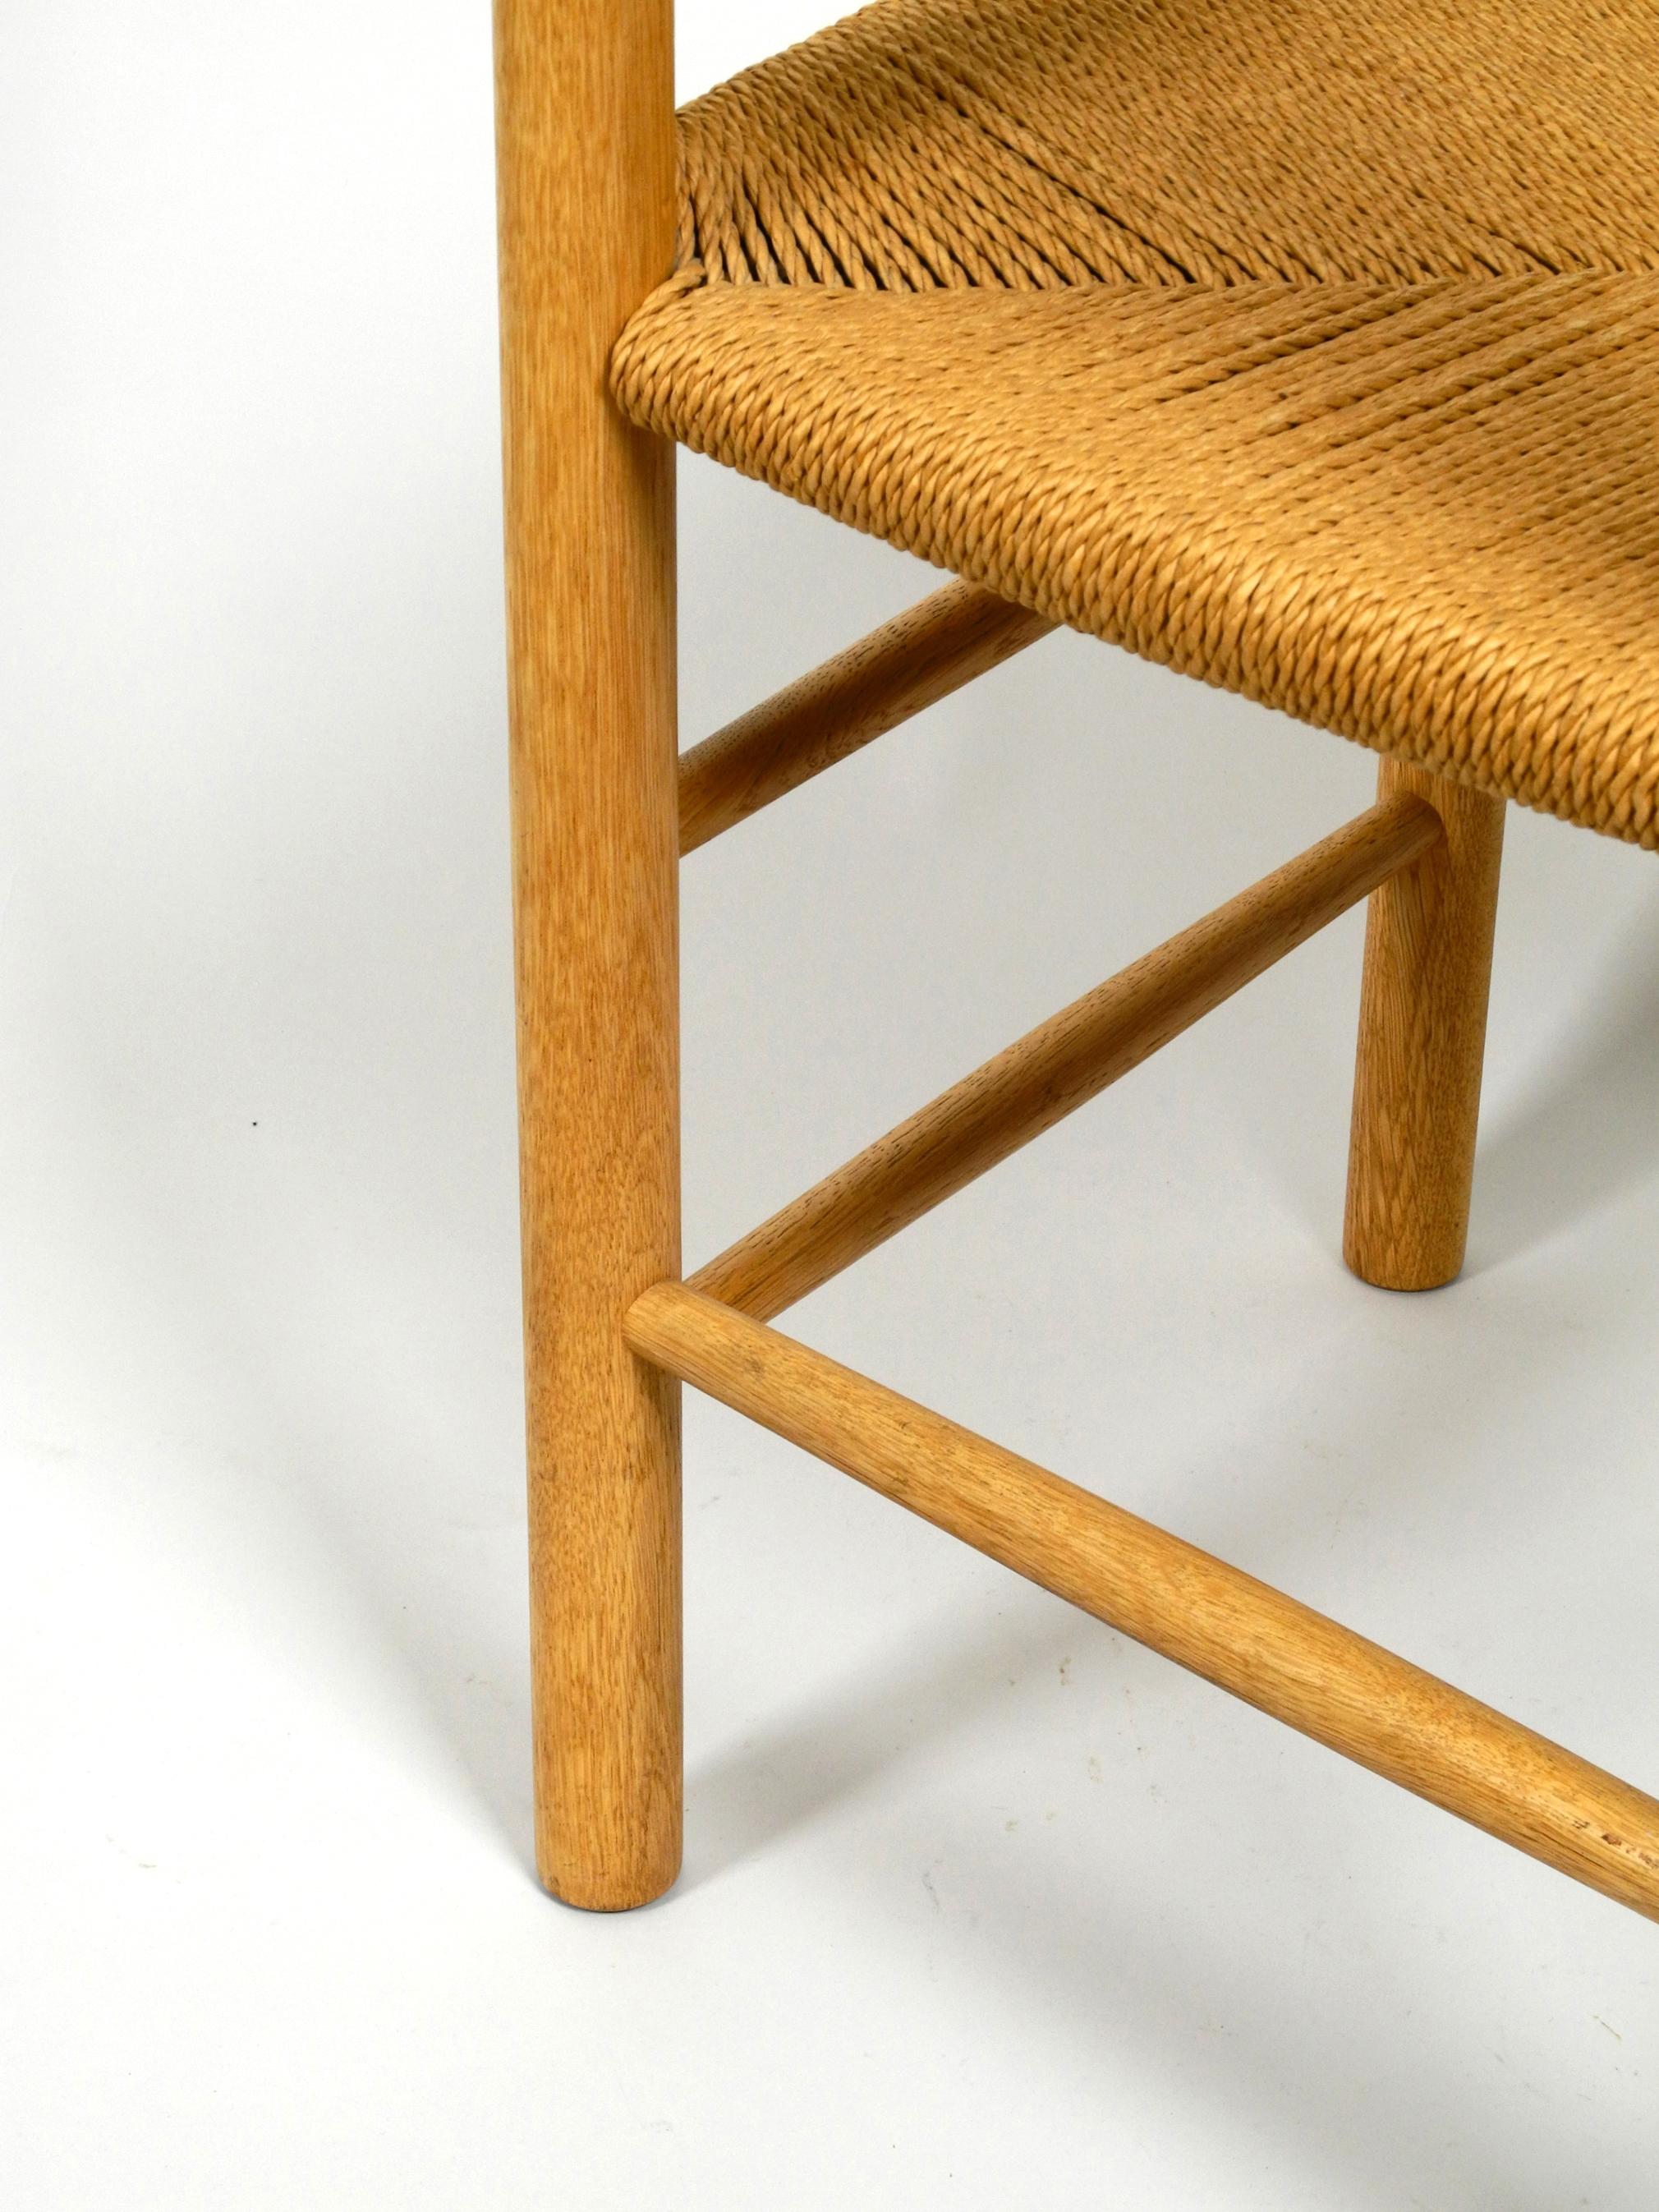 Four J39 Mogensen Chairs in Oak and Cord Weaving by Børge Mogensen Fredericia 2